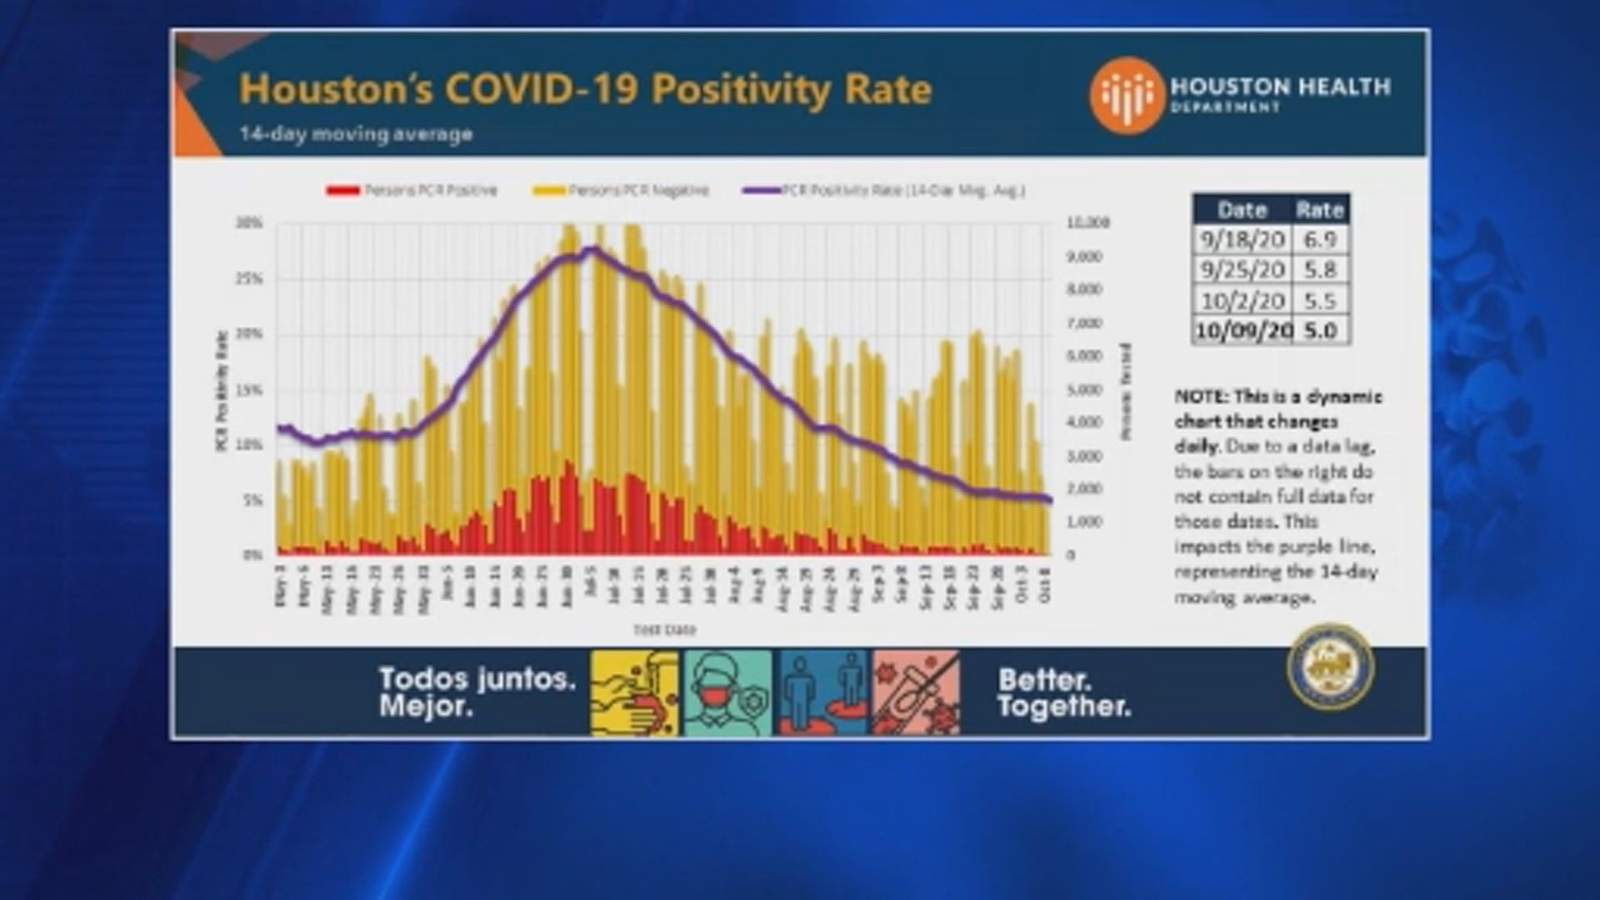 Houston’s COVID-19 positivity rate drops to 5%, health department reports